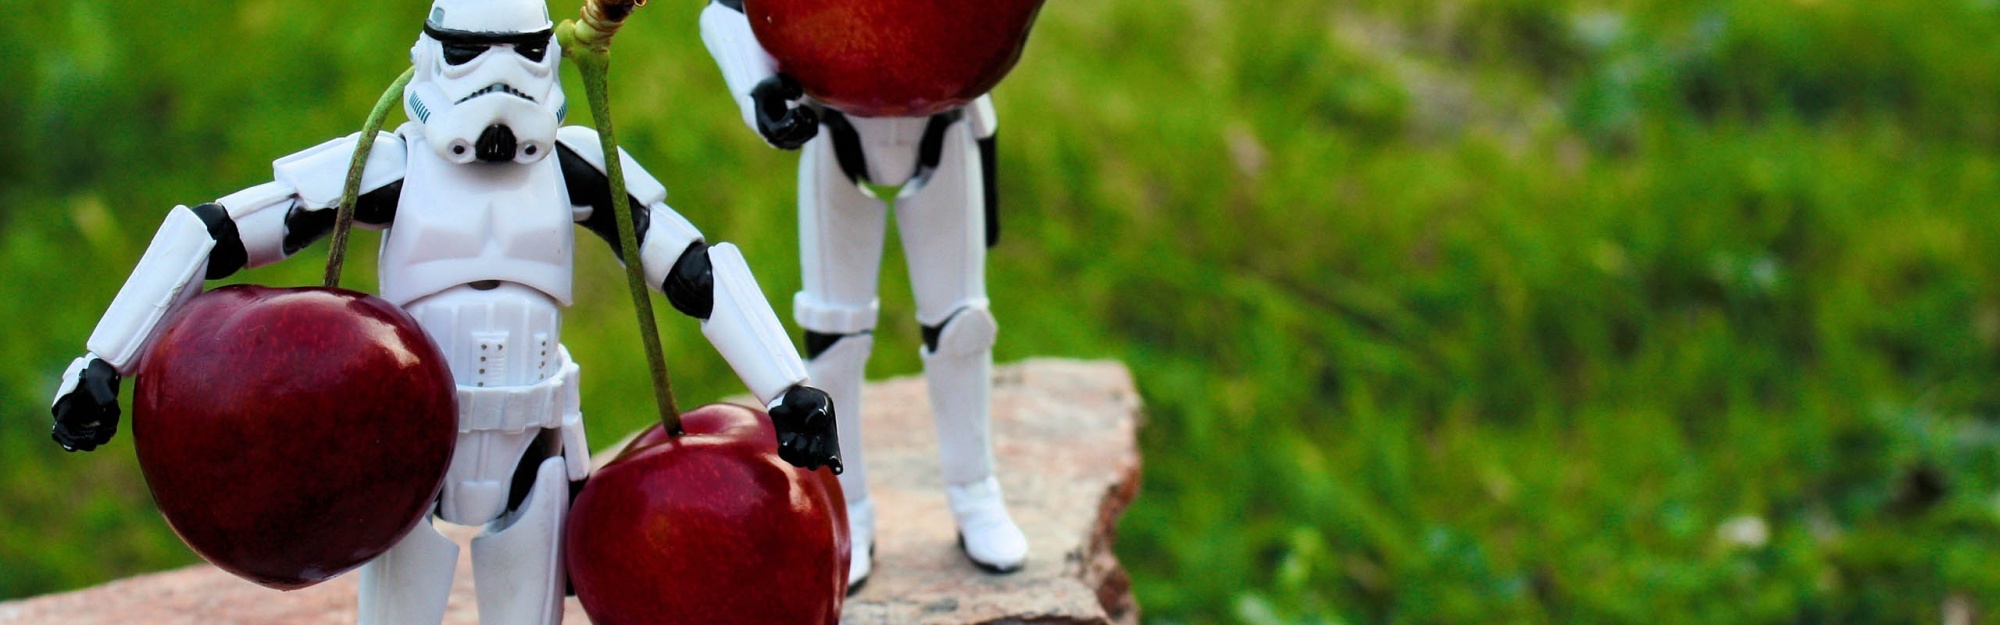 Stormtroopers Toys